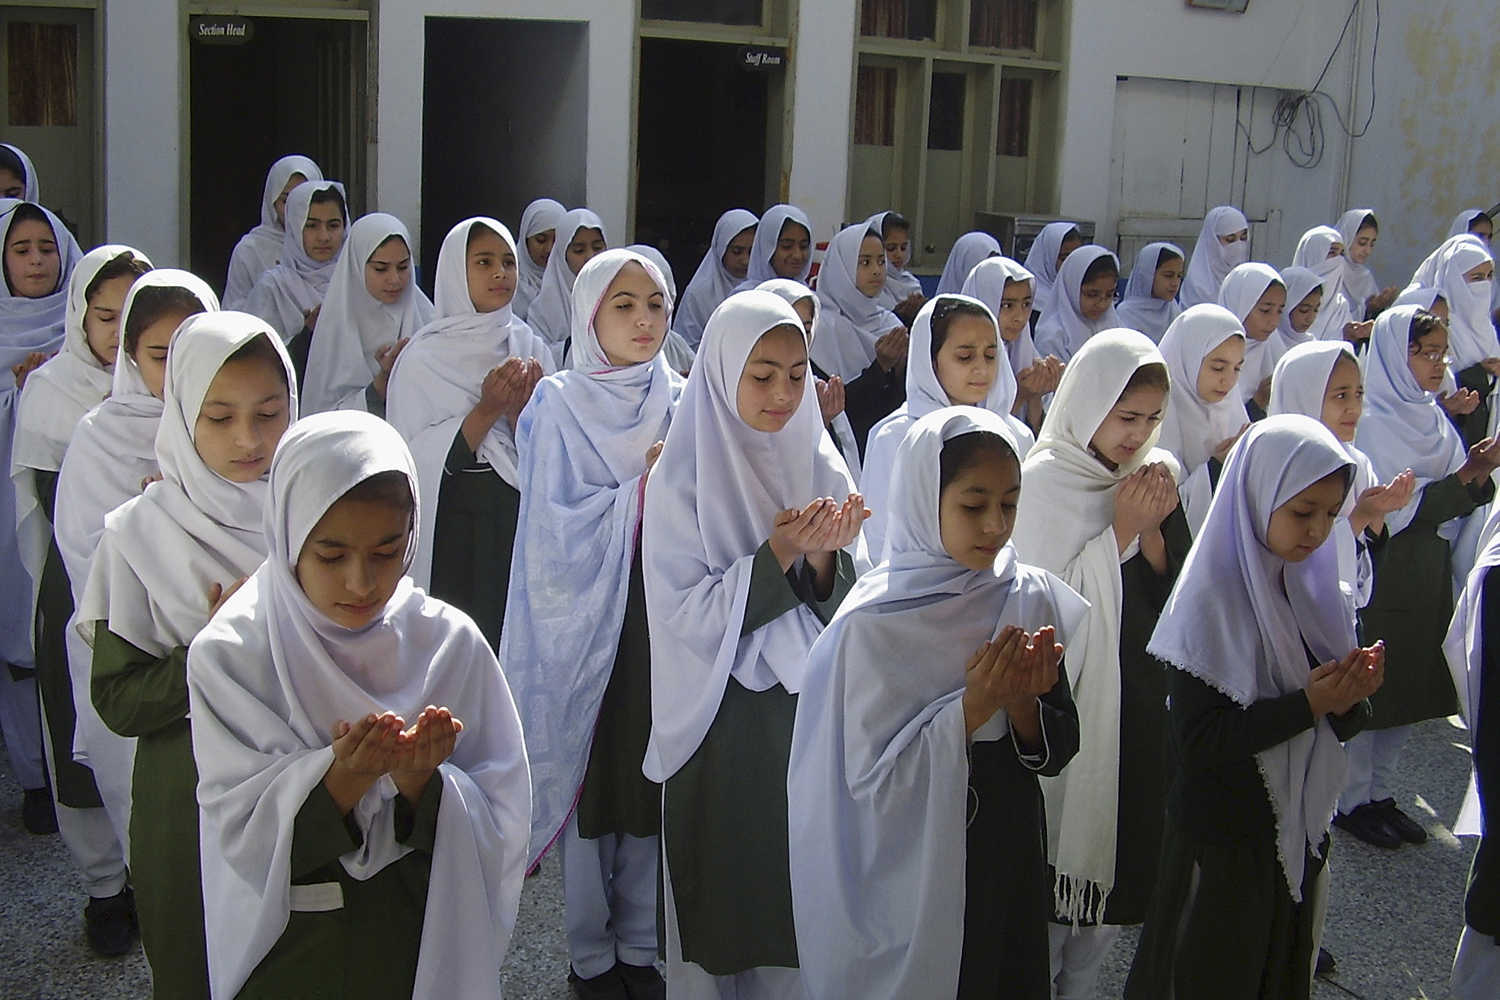 Image: Nov. 10, 2012. Pakistani students pray for the health of 15-year-old Malala Yousufzai during a ceremony at their school in Mingora, Pakistan. Hundreds of Pakistani students and human right activists observed a day of appreciation for Yousufzai, who is being treated in Britain after being shot by the Taliban.